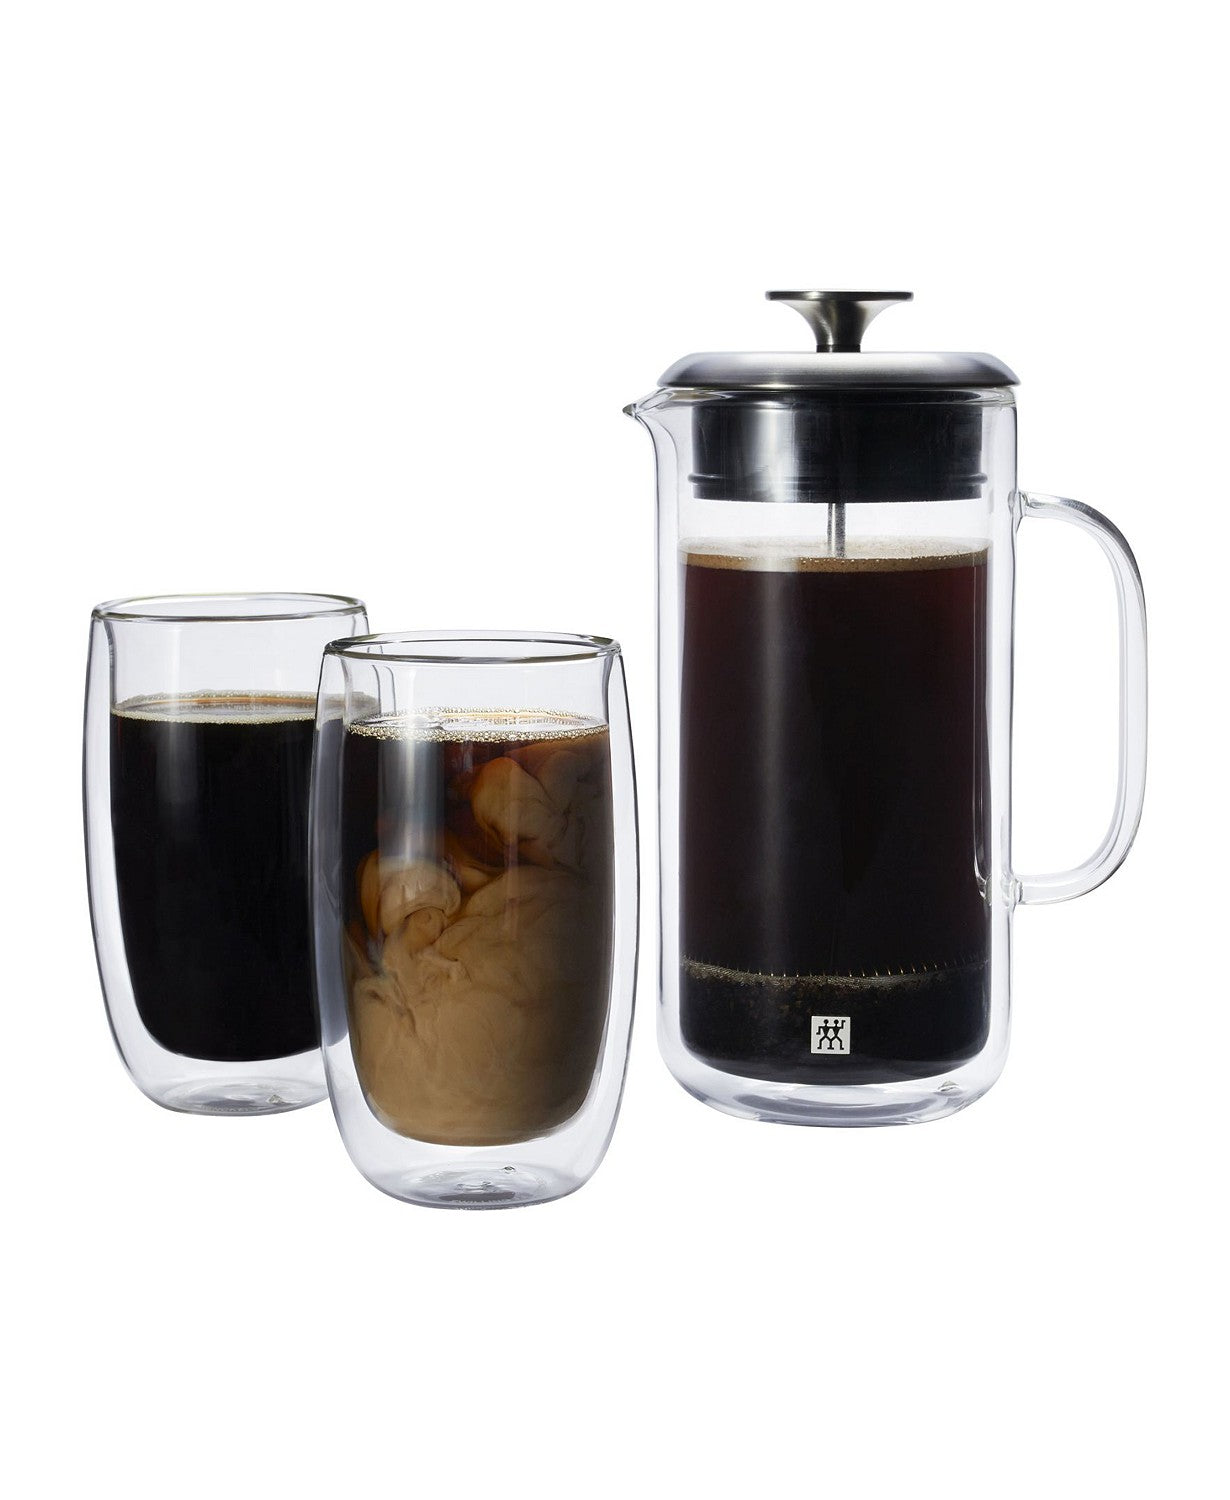 french press filled with coffee and two latte glasses filled with coffee on a white background